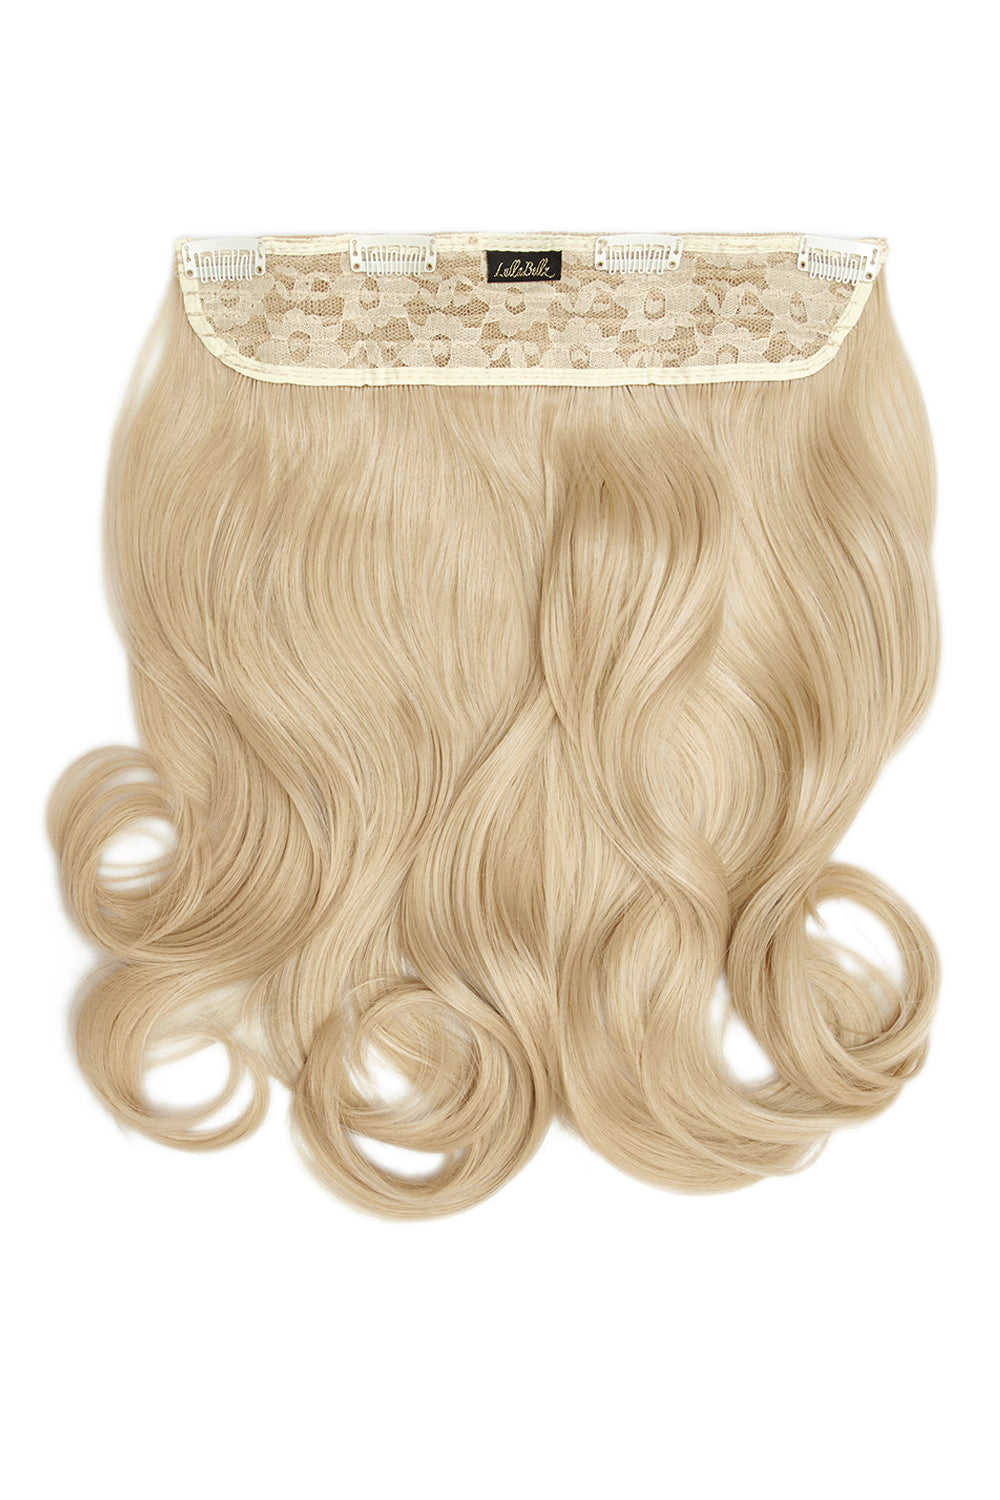 Thick 16" 1 Piece Curly Clip In Hair Extensions - LullaBellz - Champagne Blonde